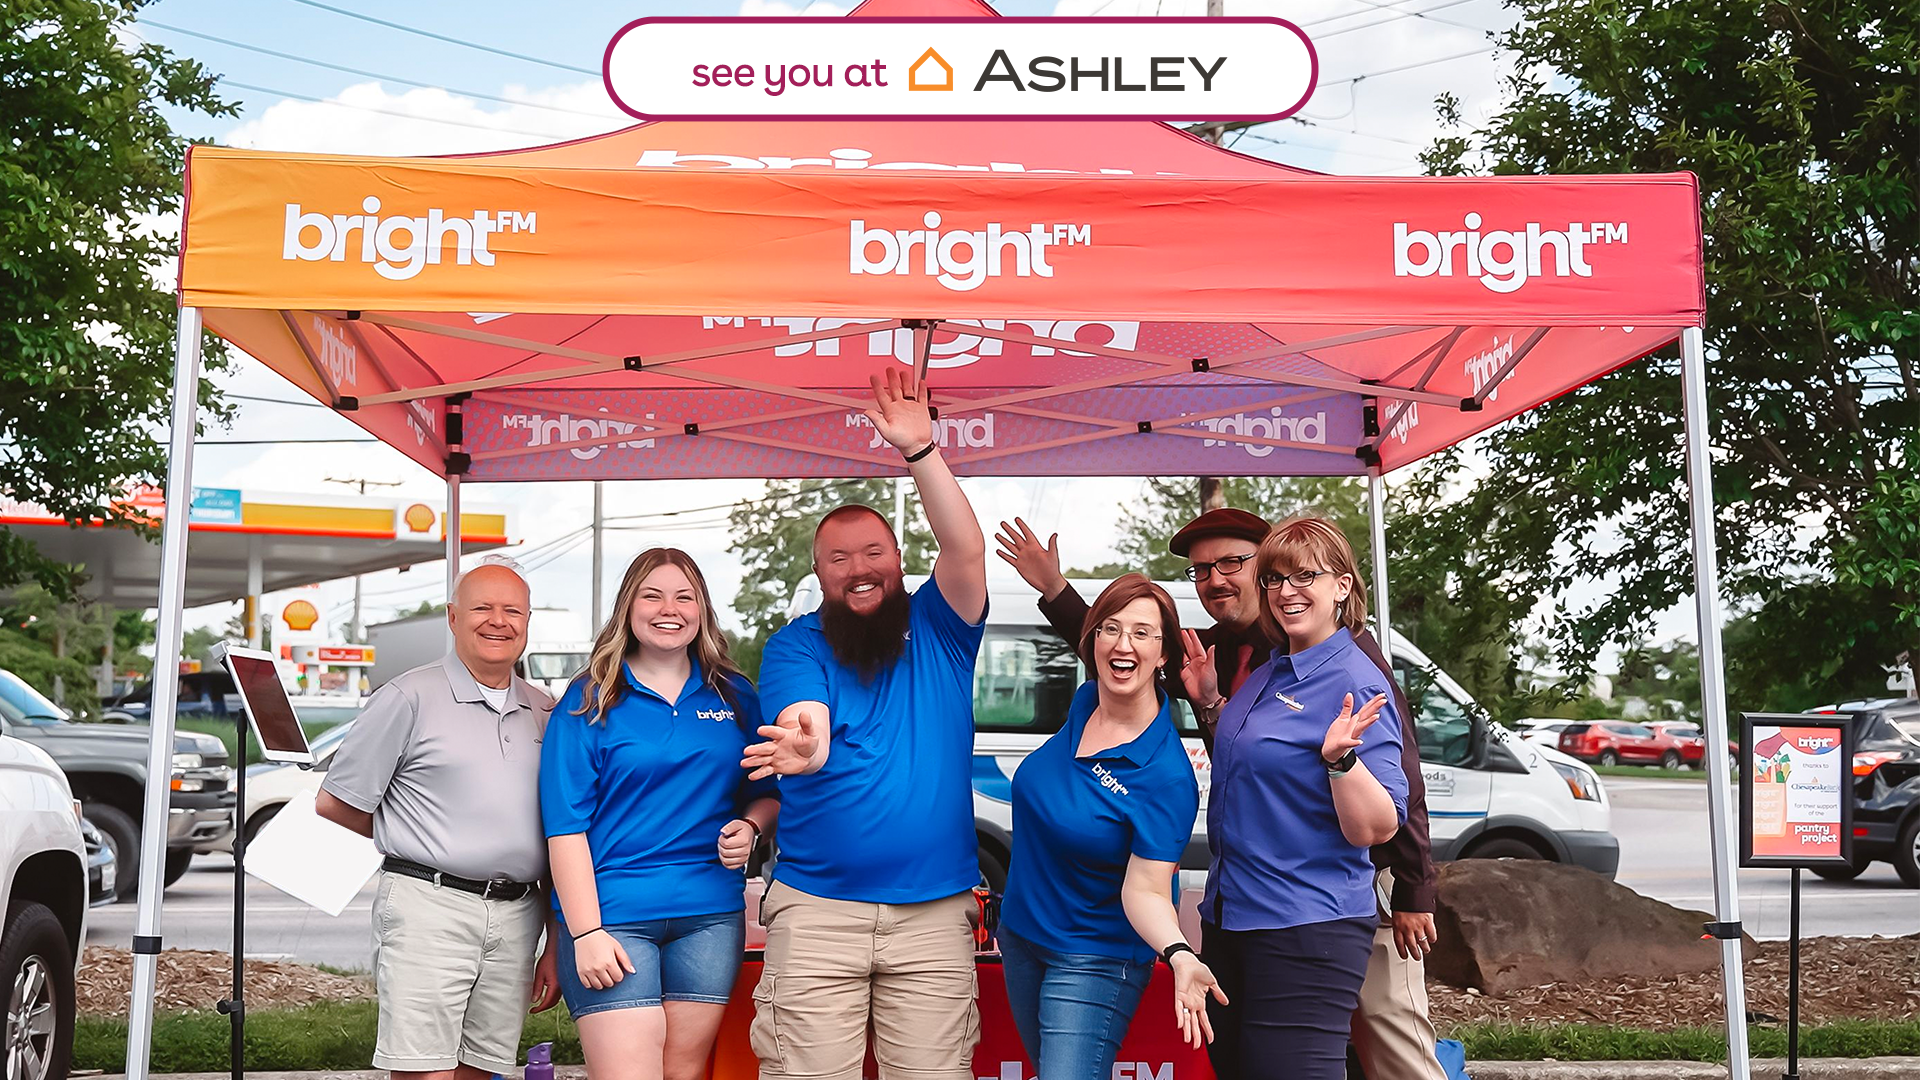 BRIGHT-FM team members smiling and lifting their hands up while standing under a pink and orange BRIGHT-FM tent